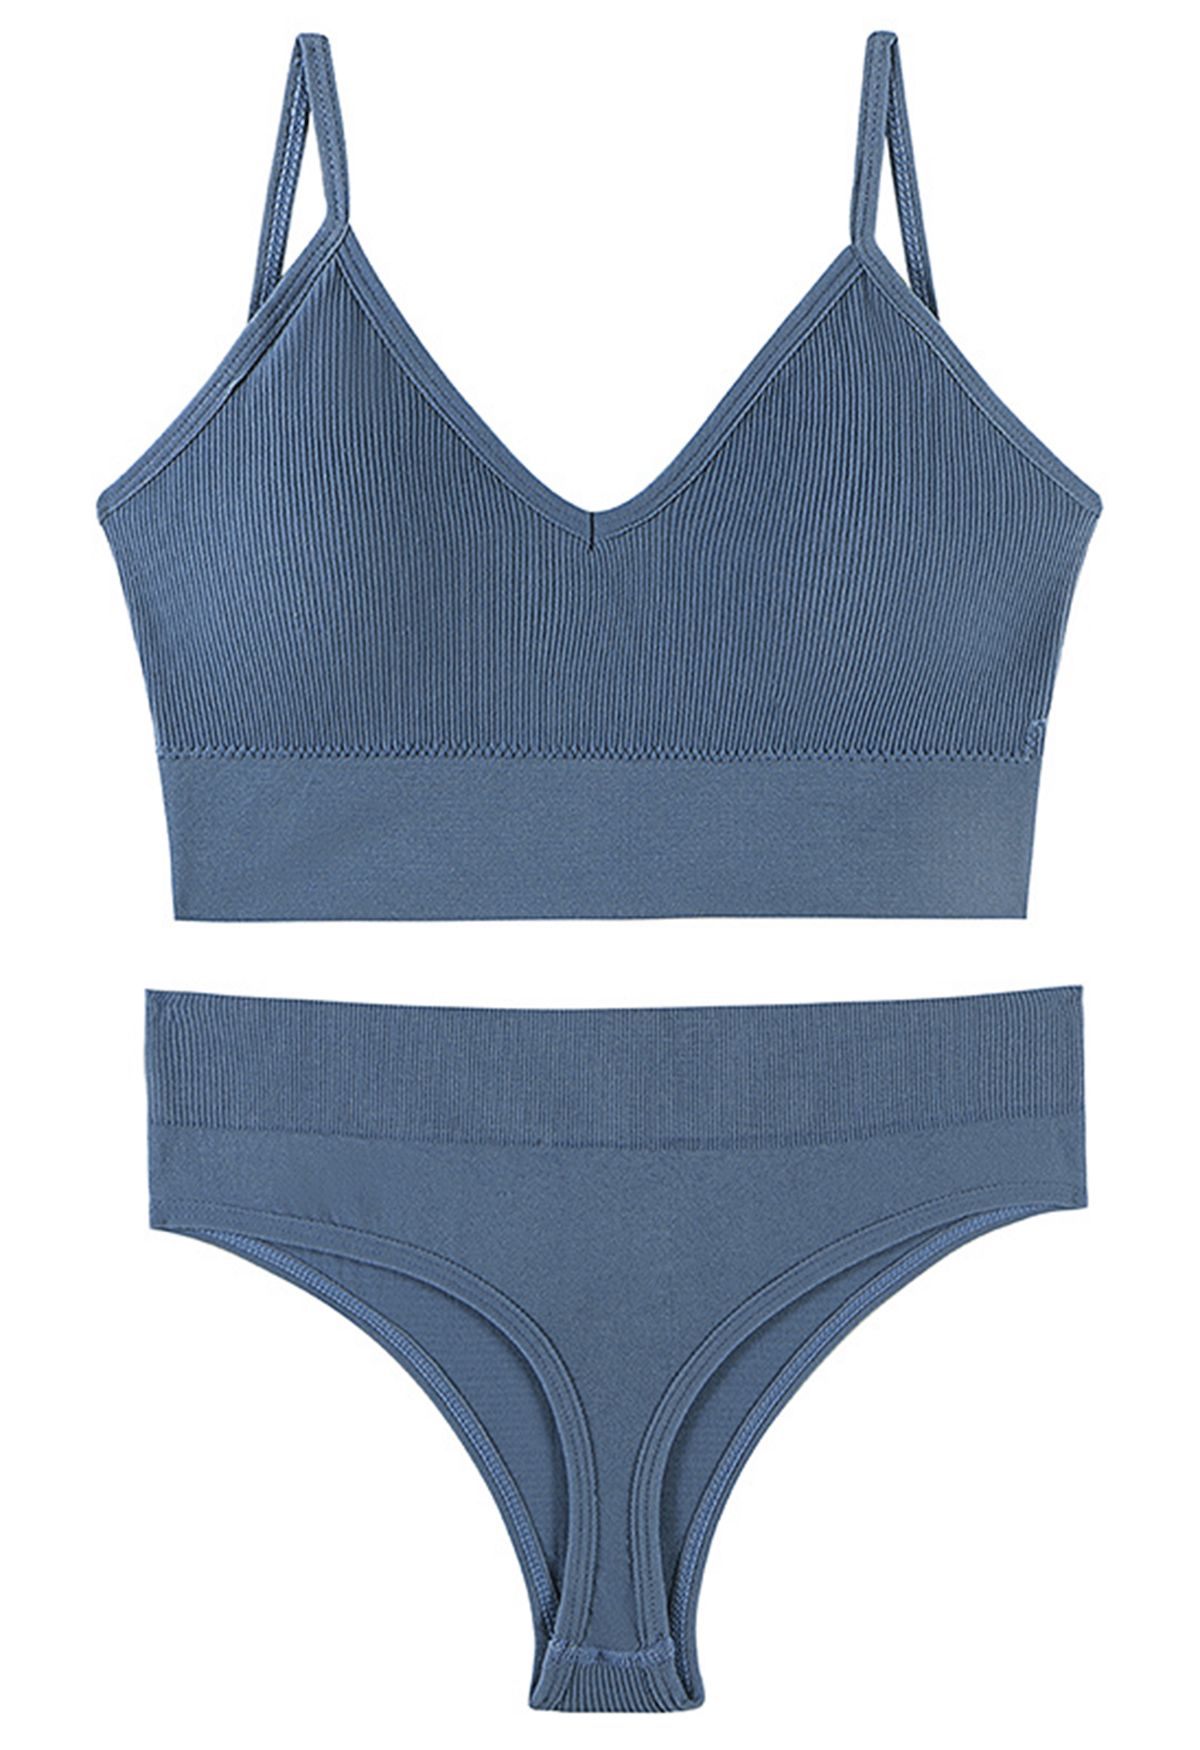 Plain Ribbed Lingerie Bra Top and Thong Set in Blue - Retro, Indie